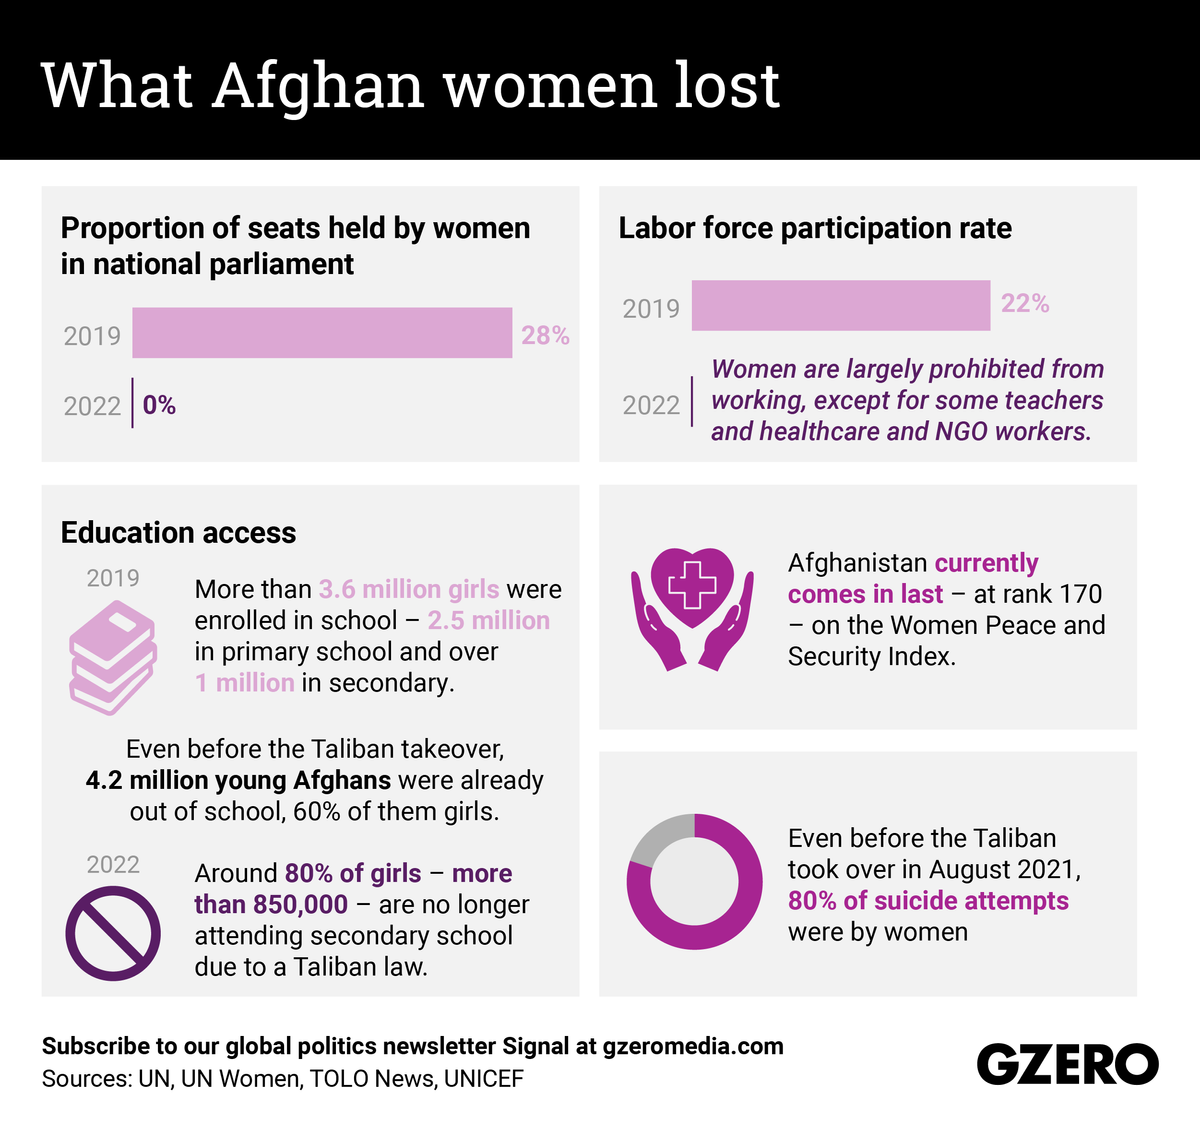 The Graphic Truth: What Afghan women lost